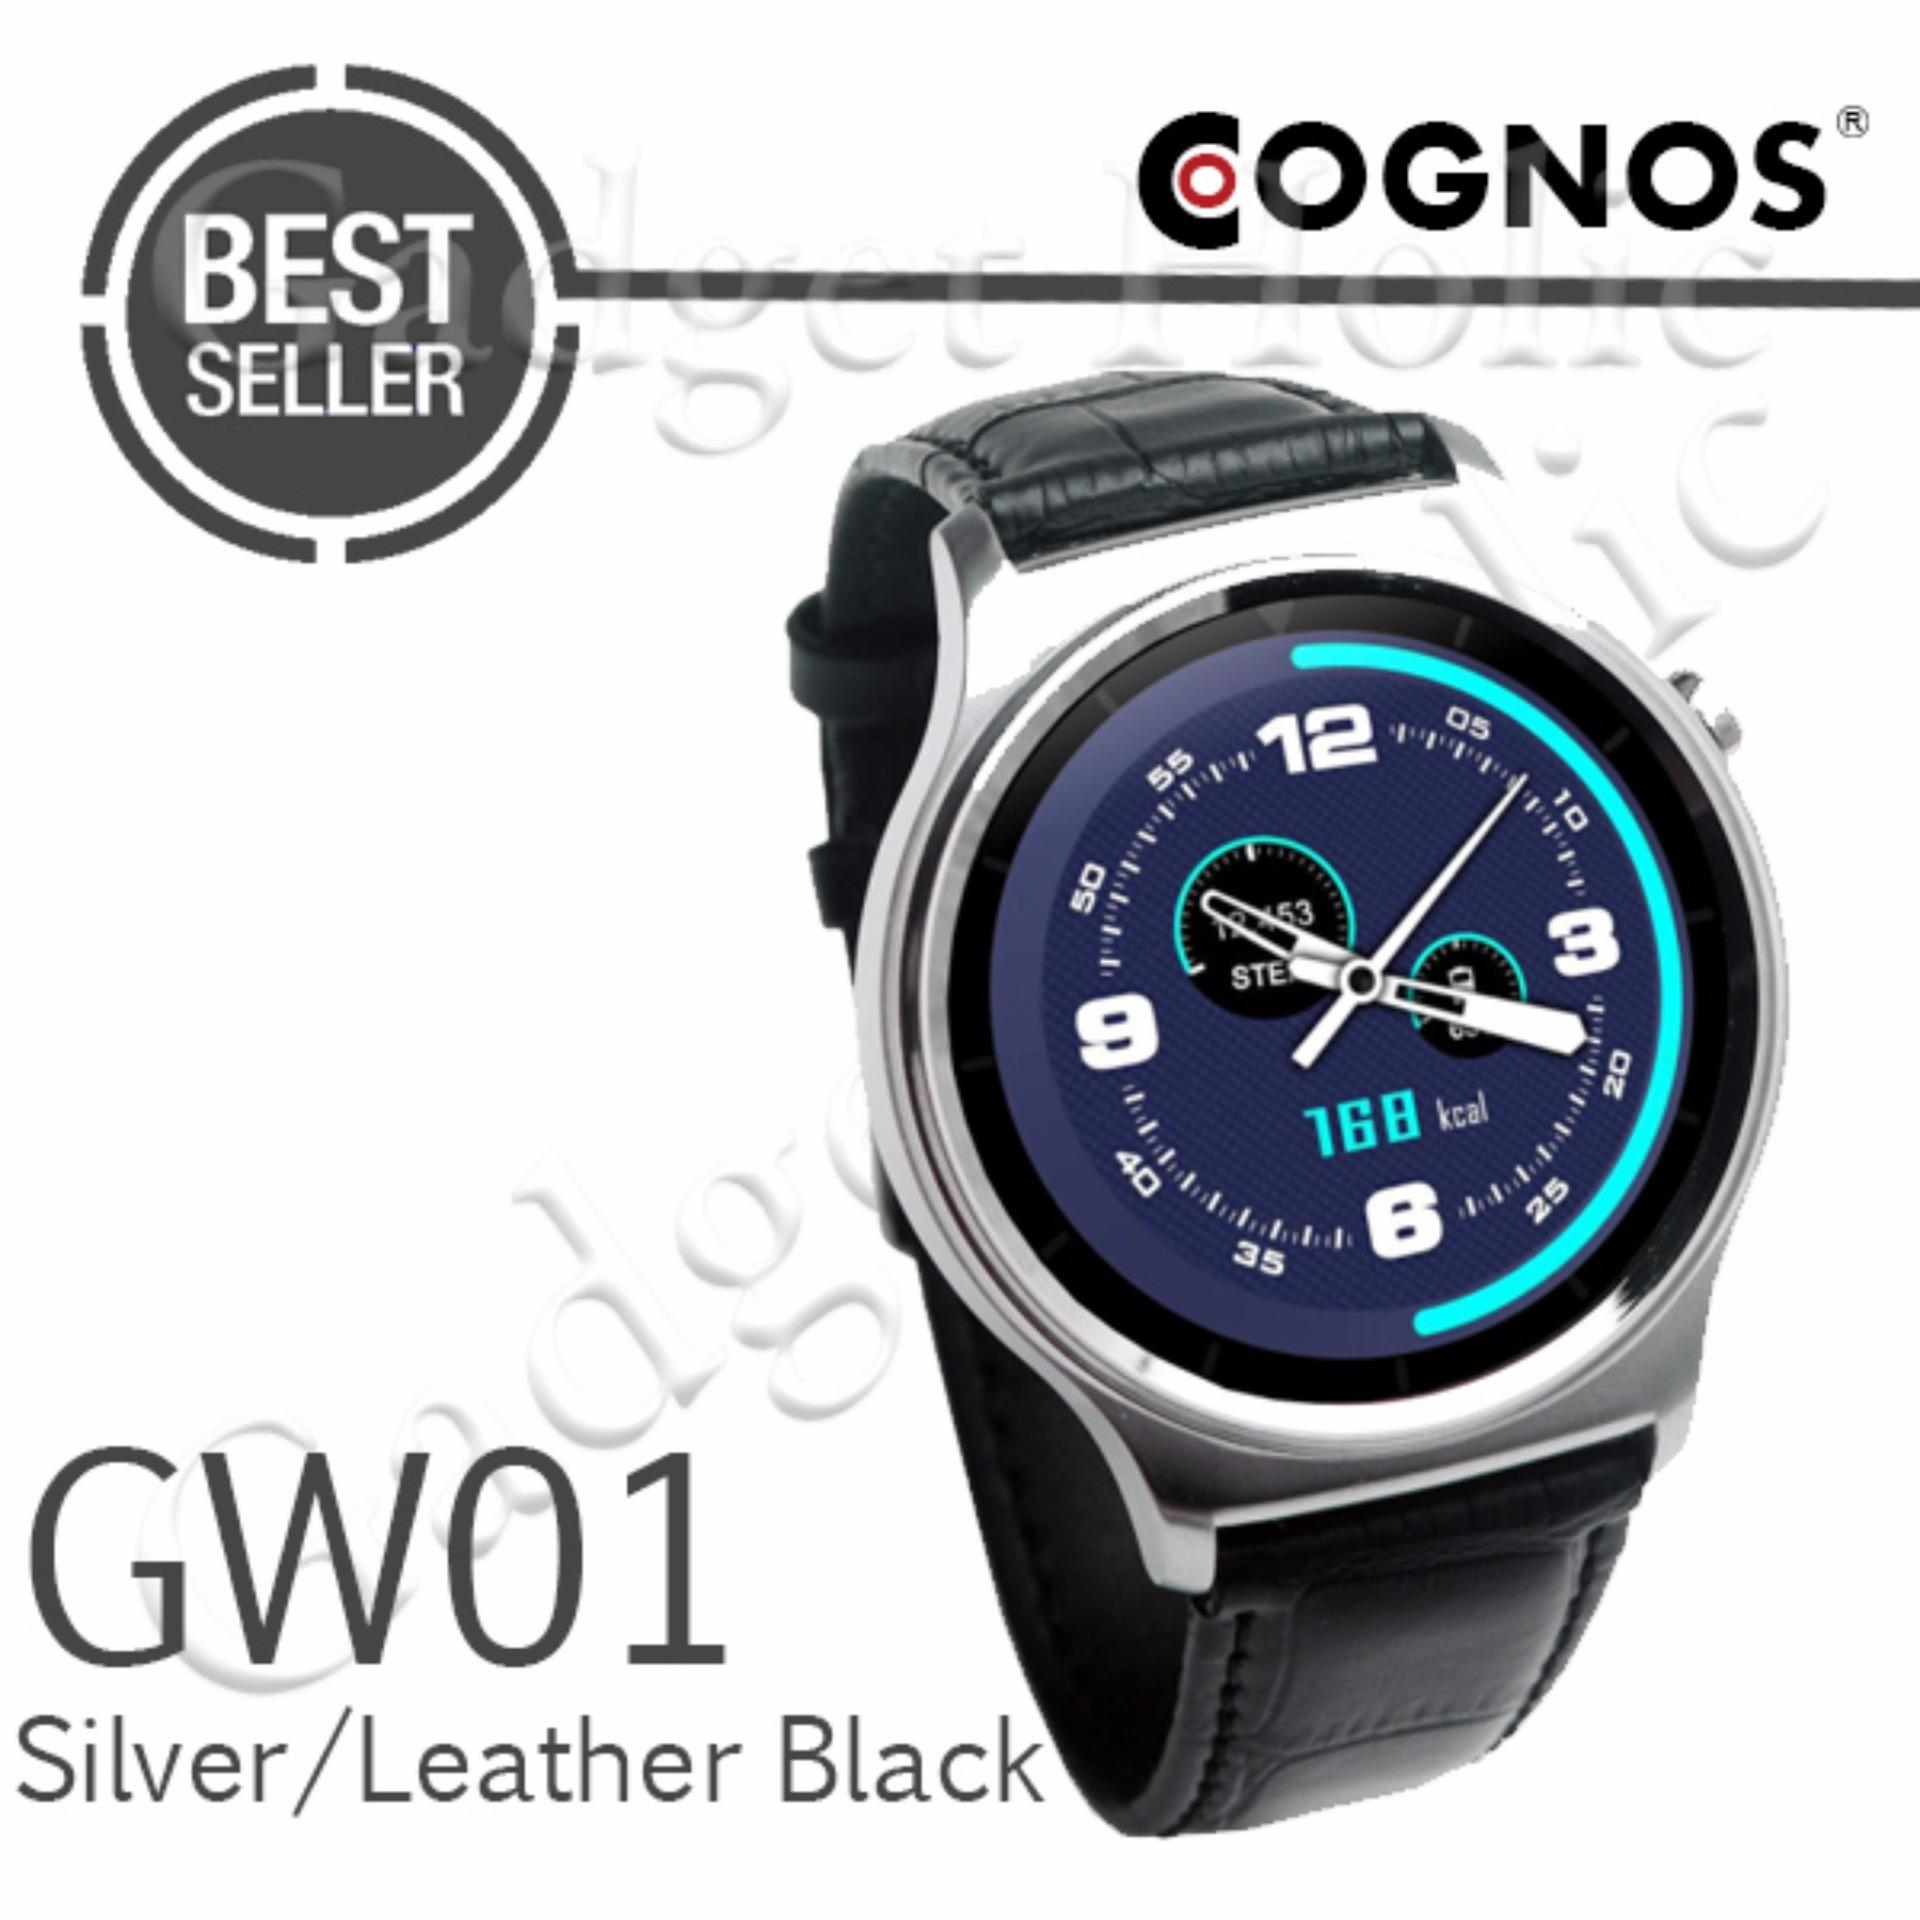 Cognos Smartwatch GW01 - GSM - Heart Rate - Silver/Leather Black